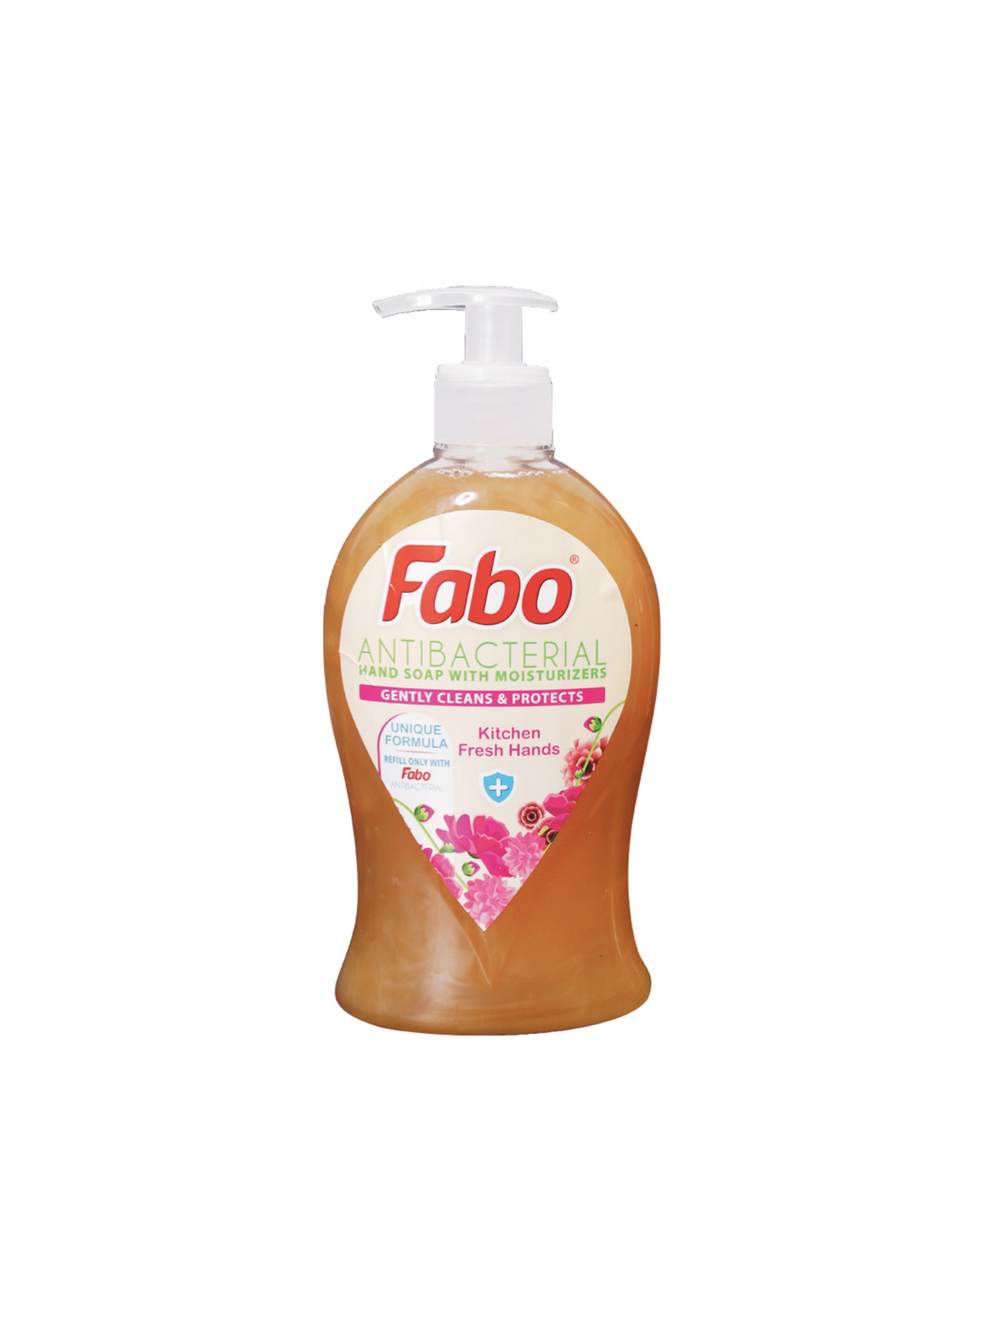 fabo-products_page-0087